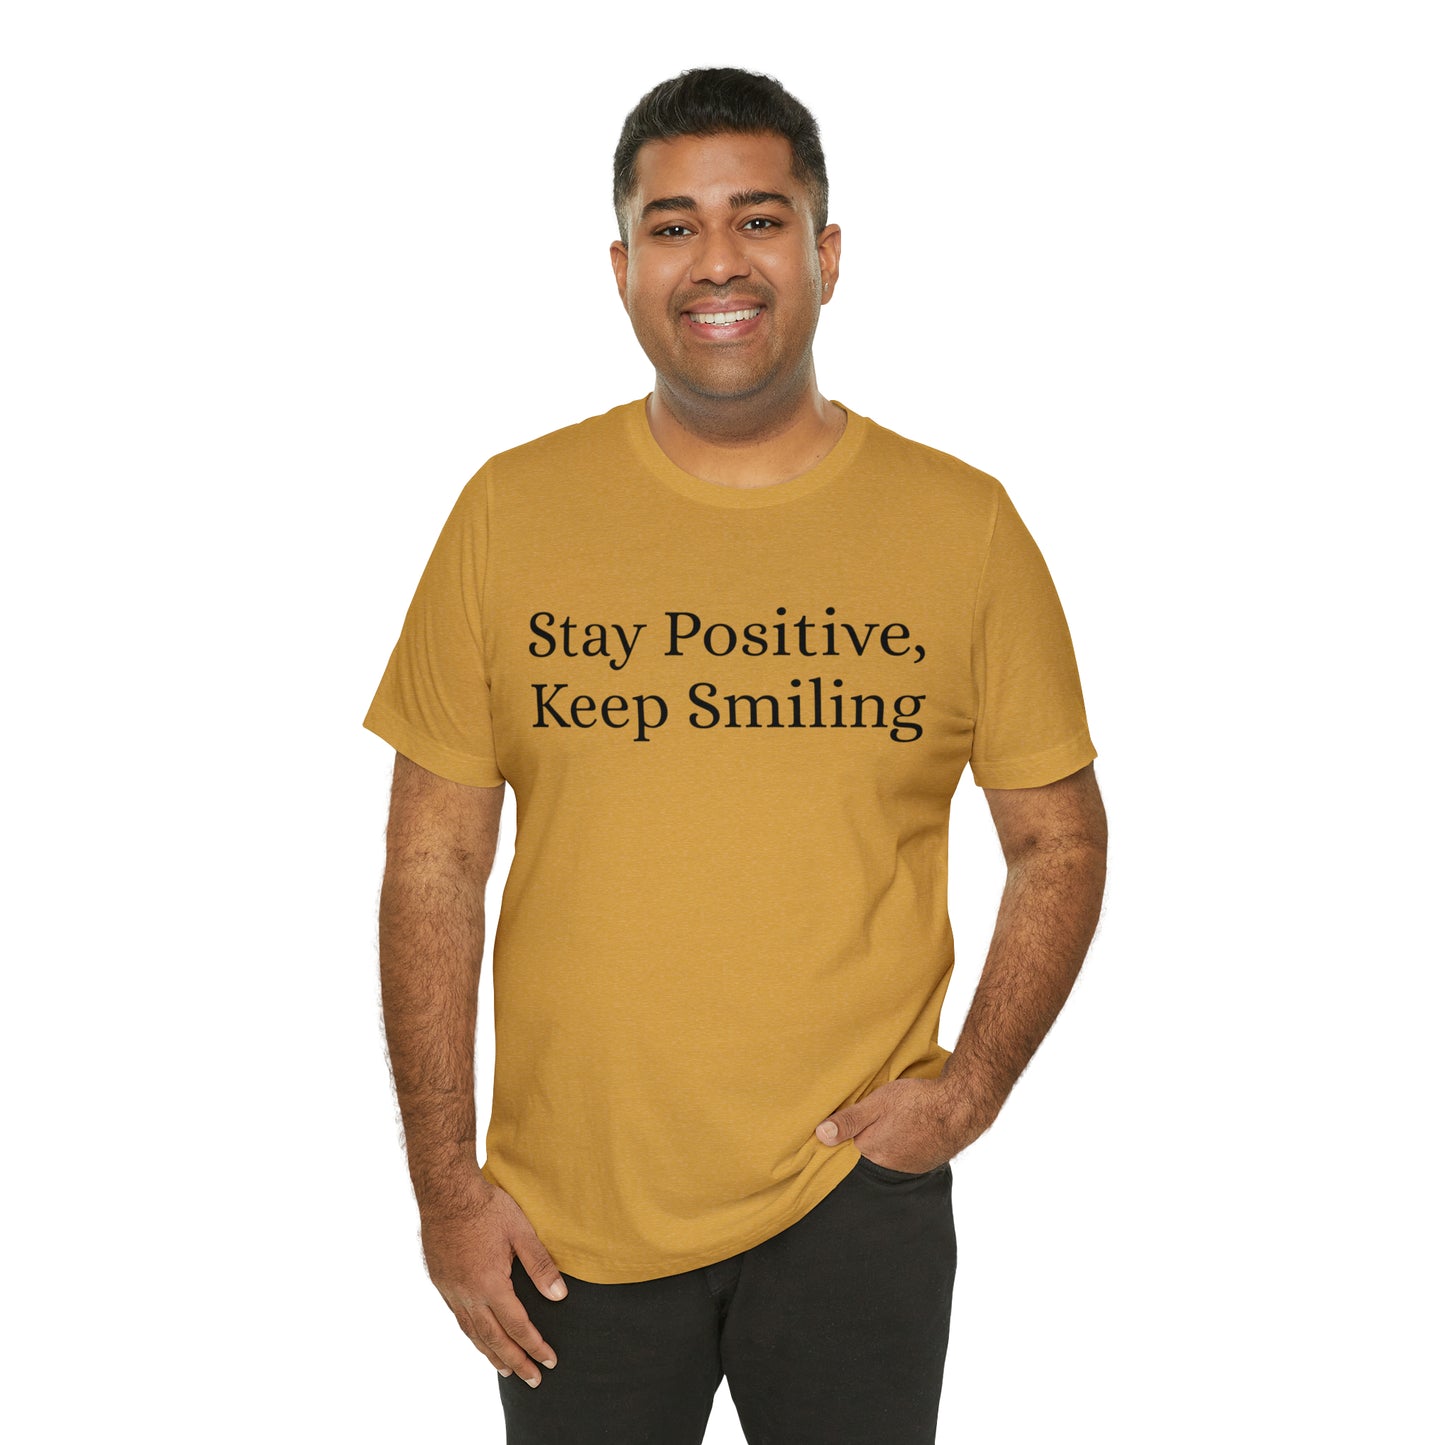 Stay Positive, Keep Smiling